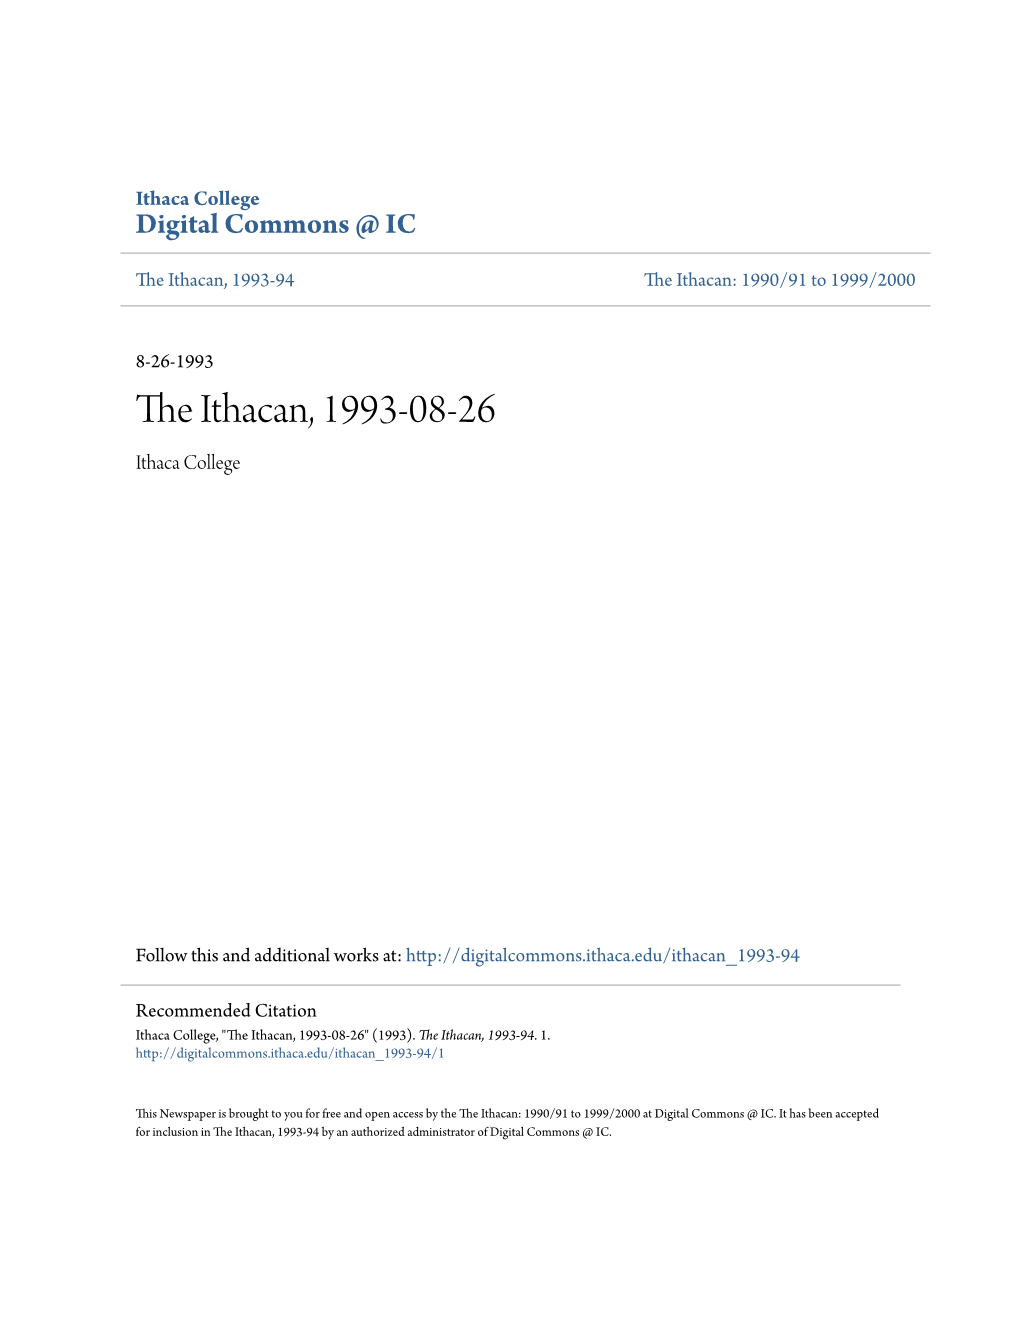 The Ithacan, 1993-08-26